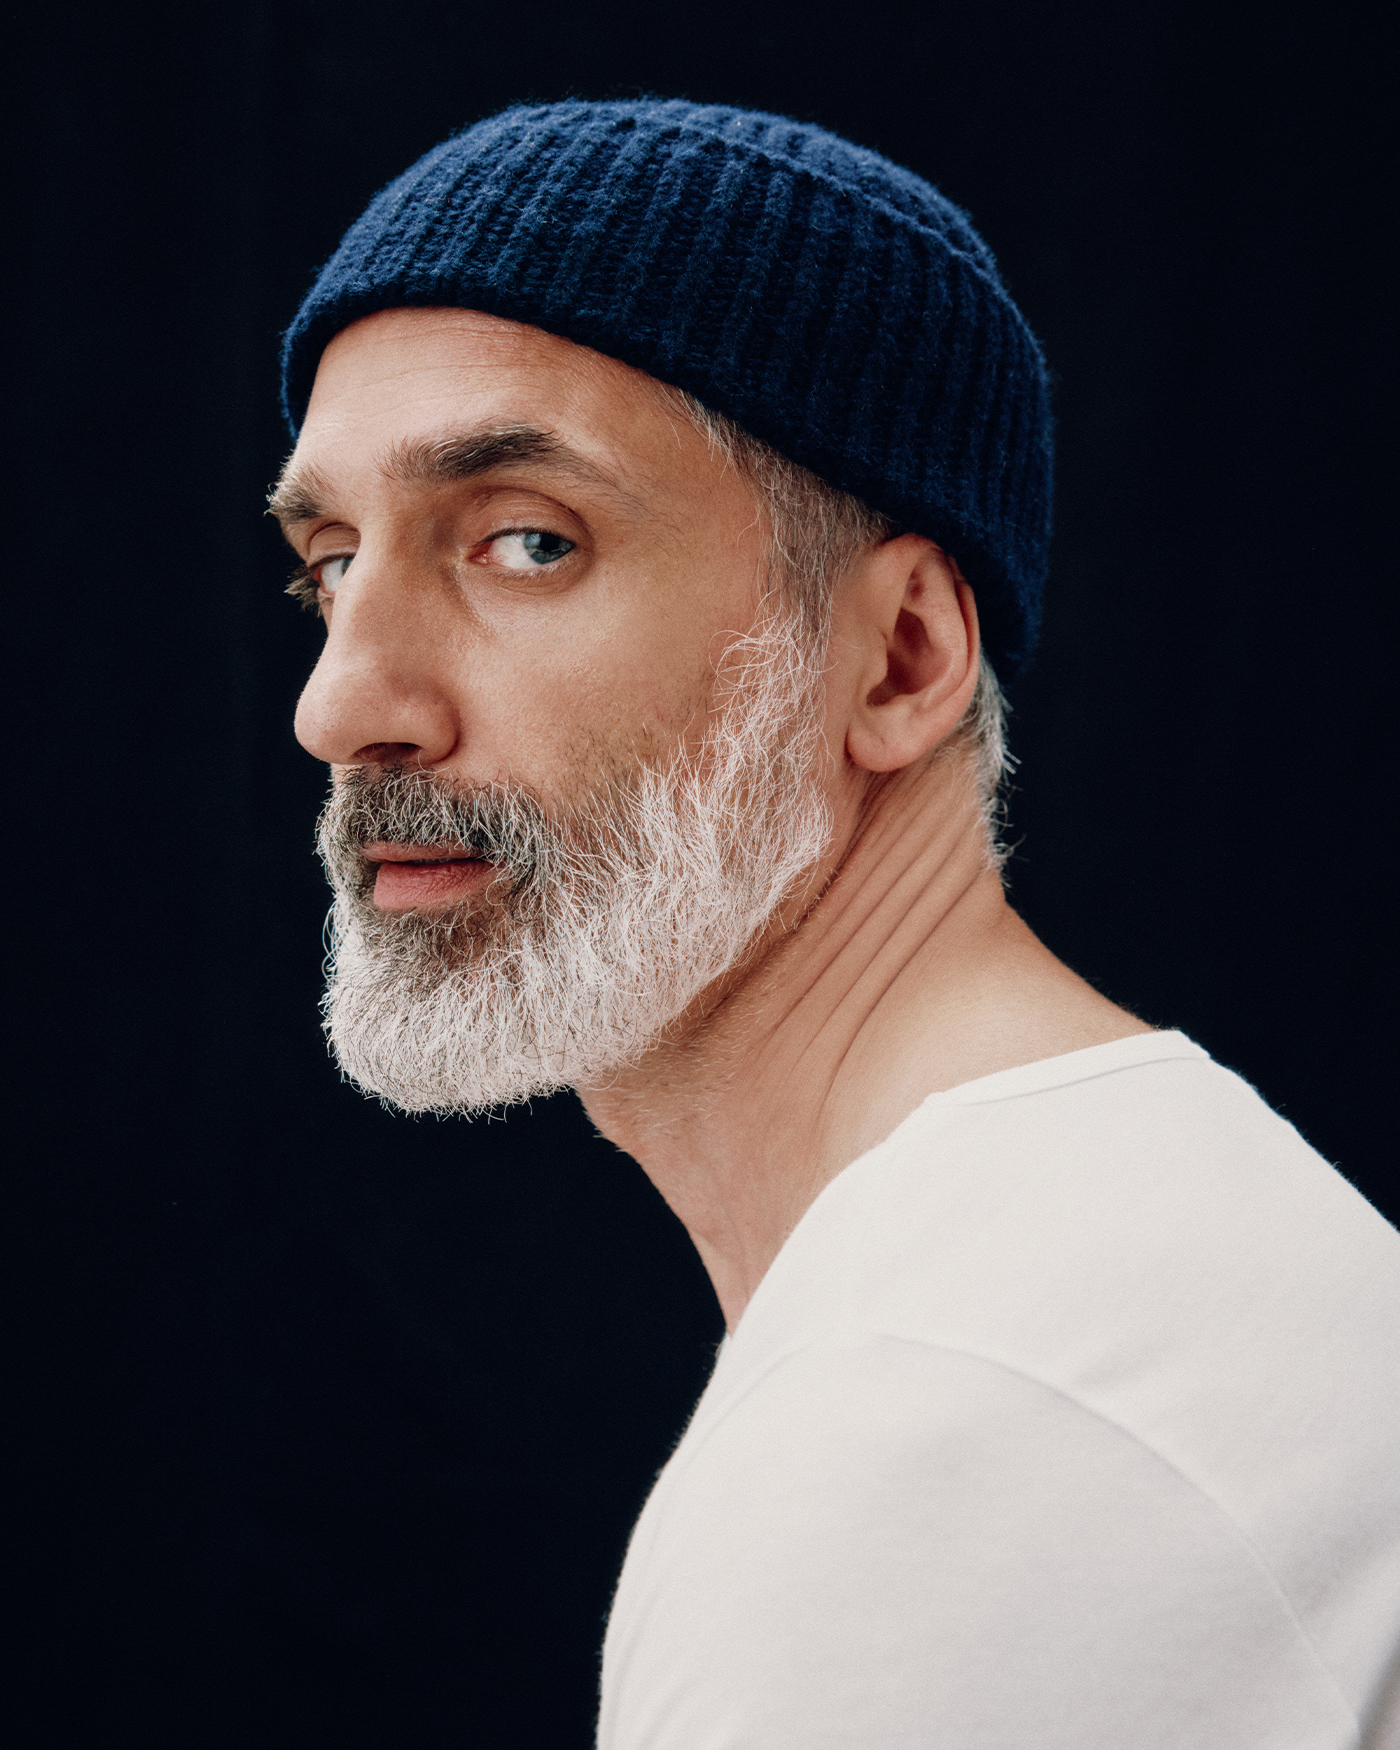 Book for Men Fall Winter fashion photoshoot headshot with blue beanie